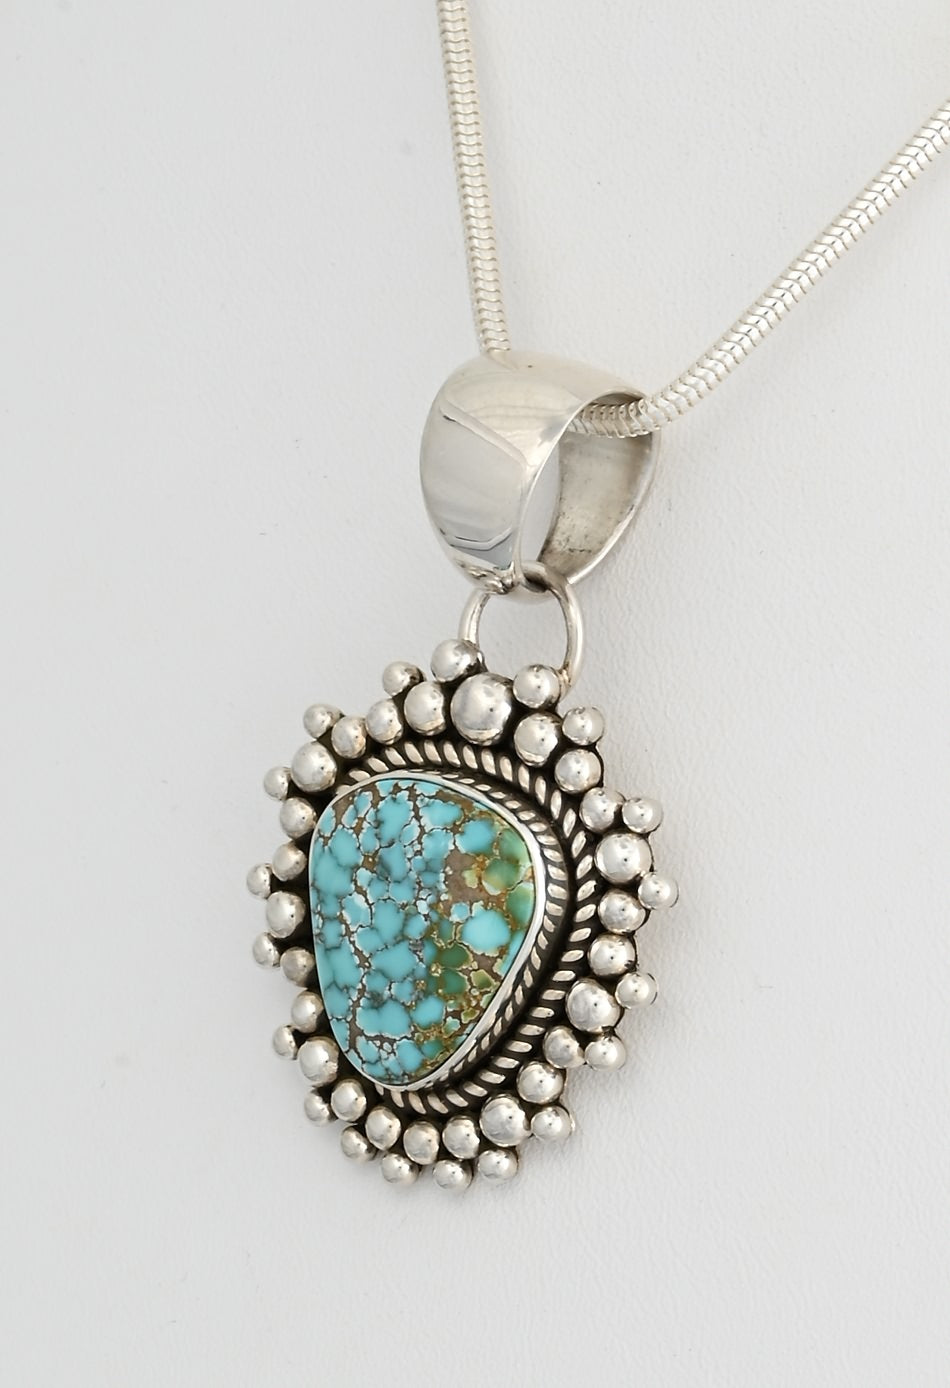 Pendant with Carico Lake Turquoise by Artie Yellowhorse